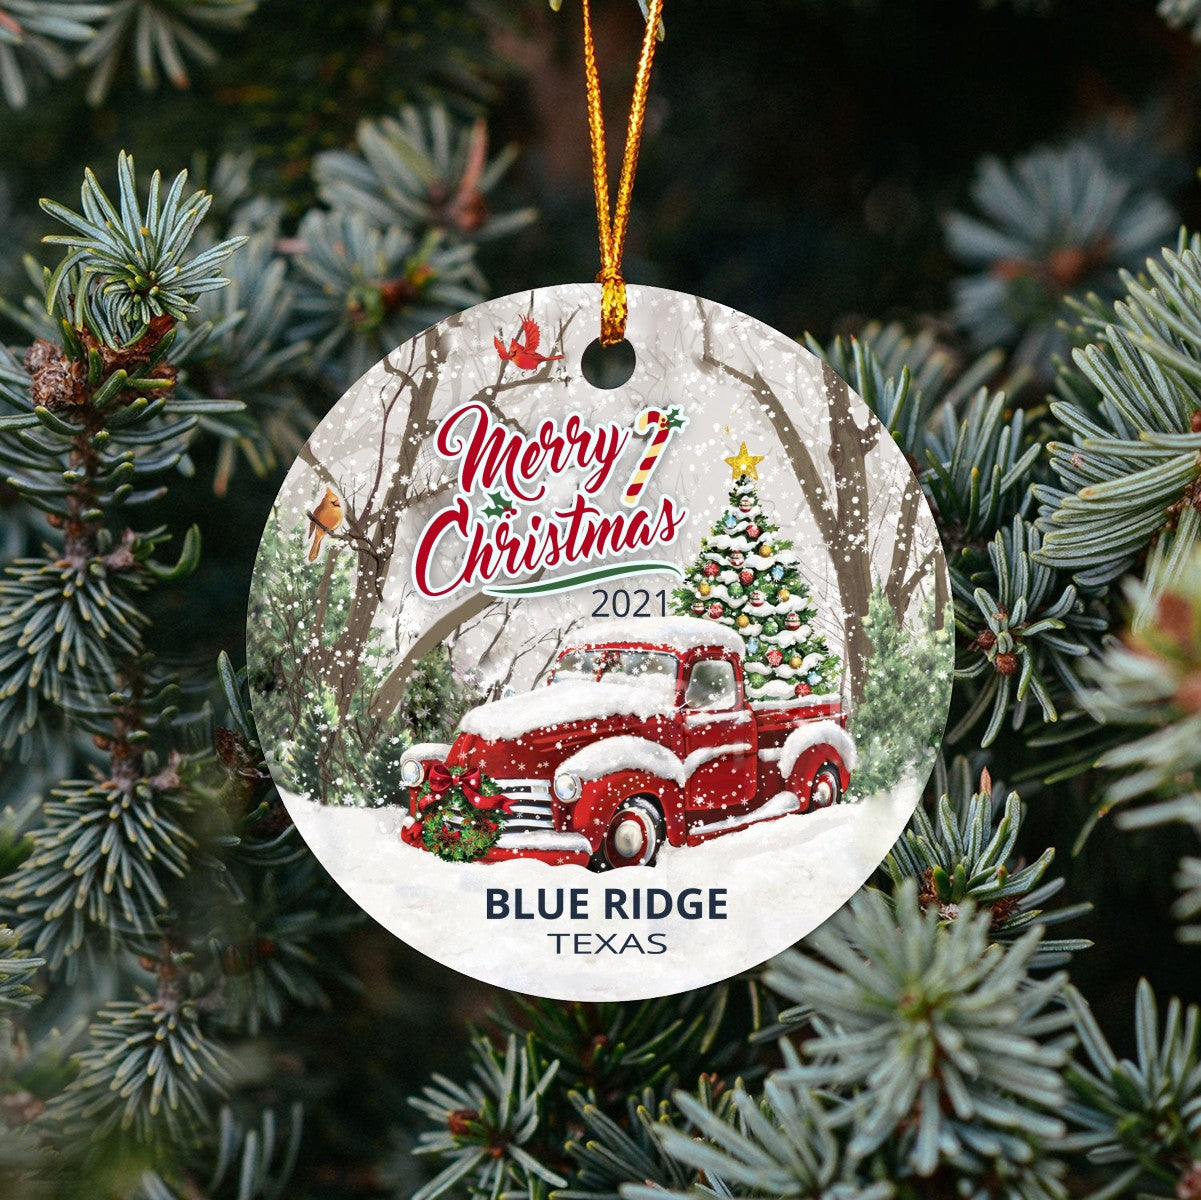 Christmas Tree Ornaments Blue Ridge - Ornament With Name City, State Blue Ridge Texas TX Ornament - Red Truck Xmas Ornaments 3'' Plastic Gift For Family, Friend And Housewarming